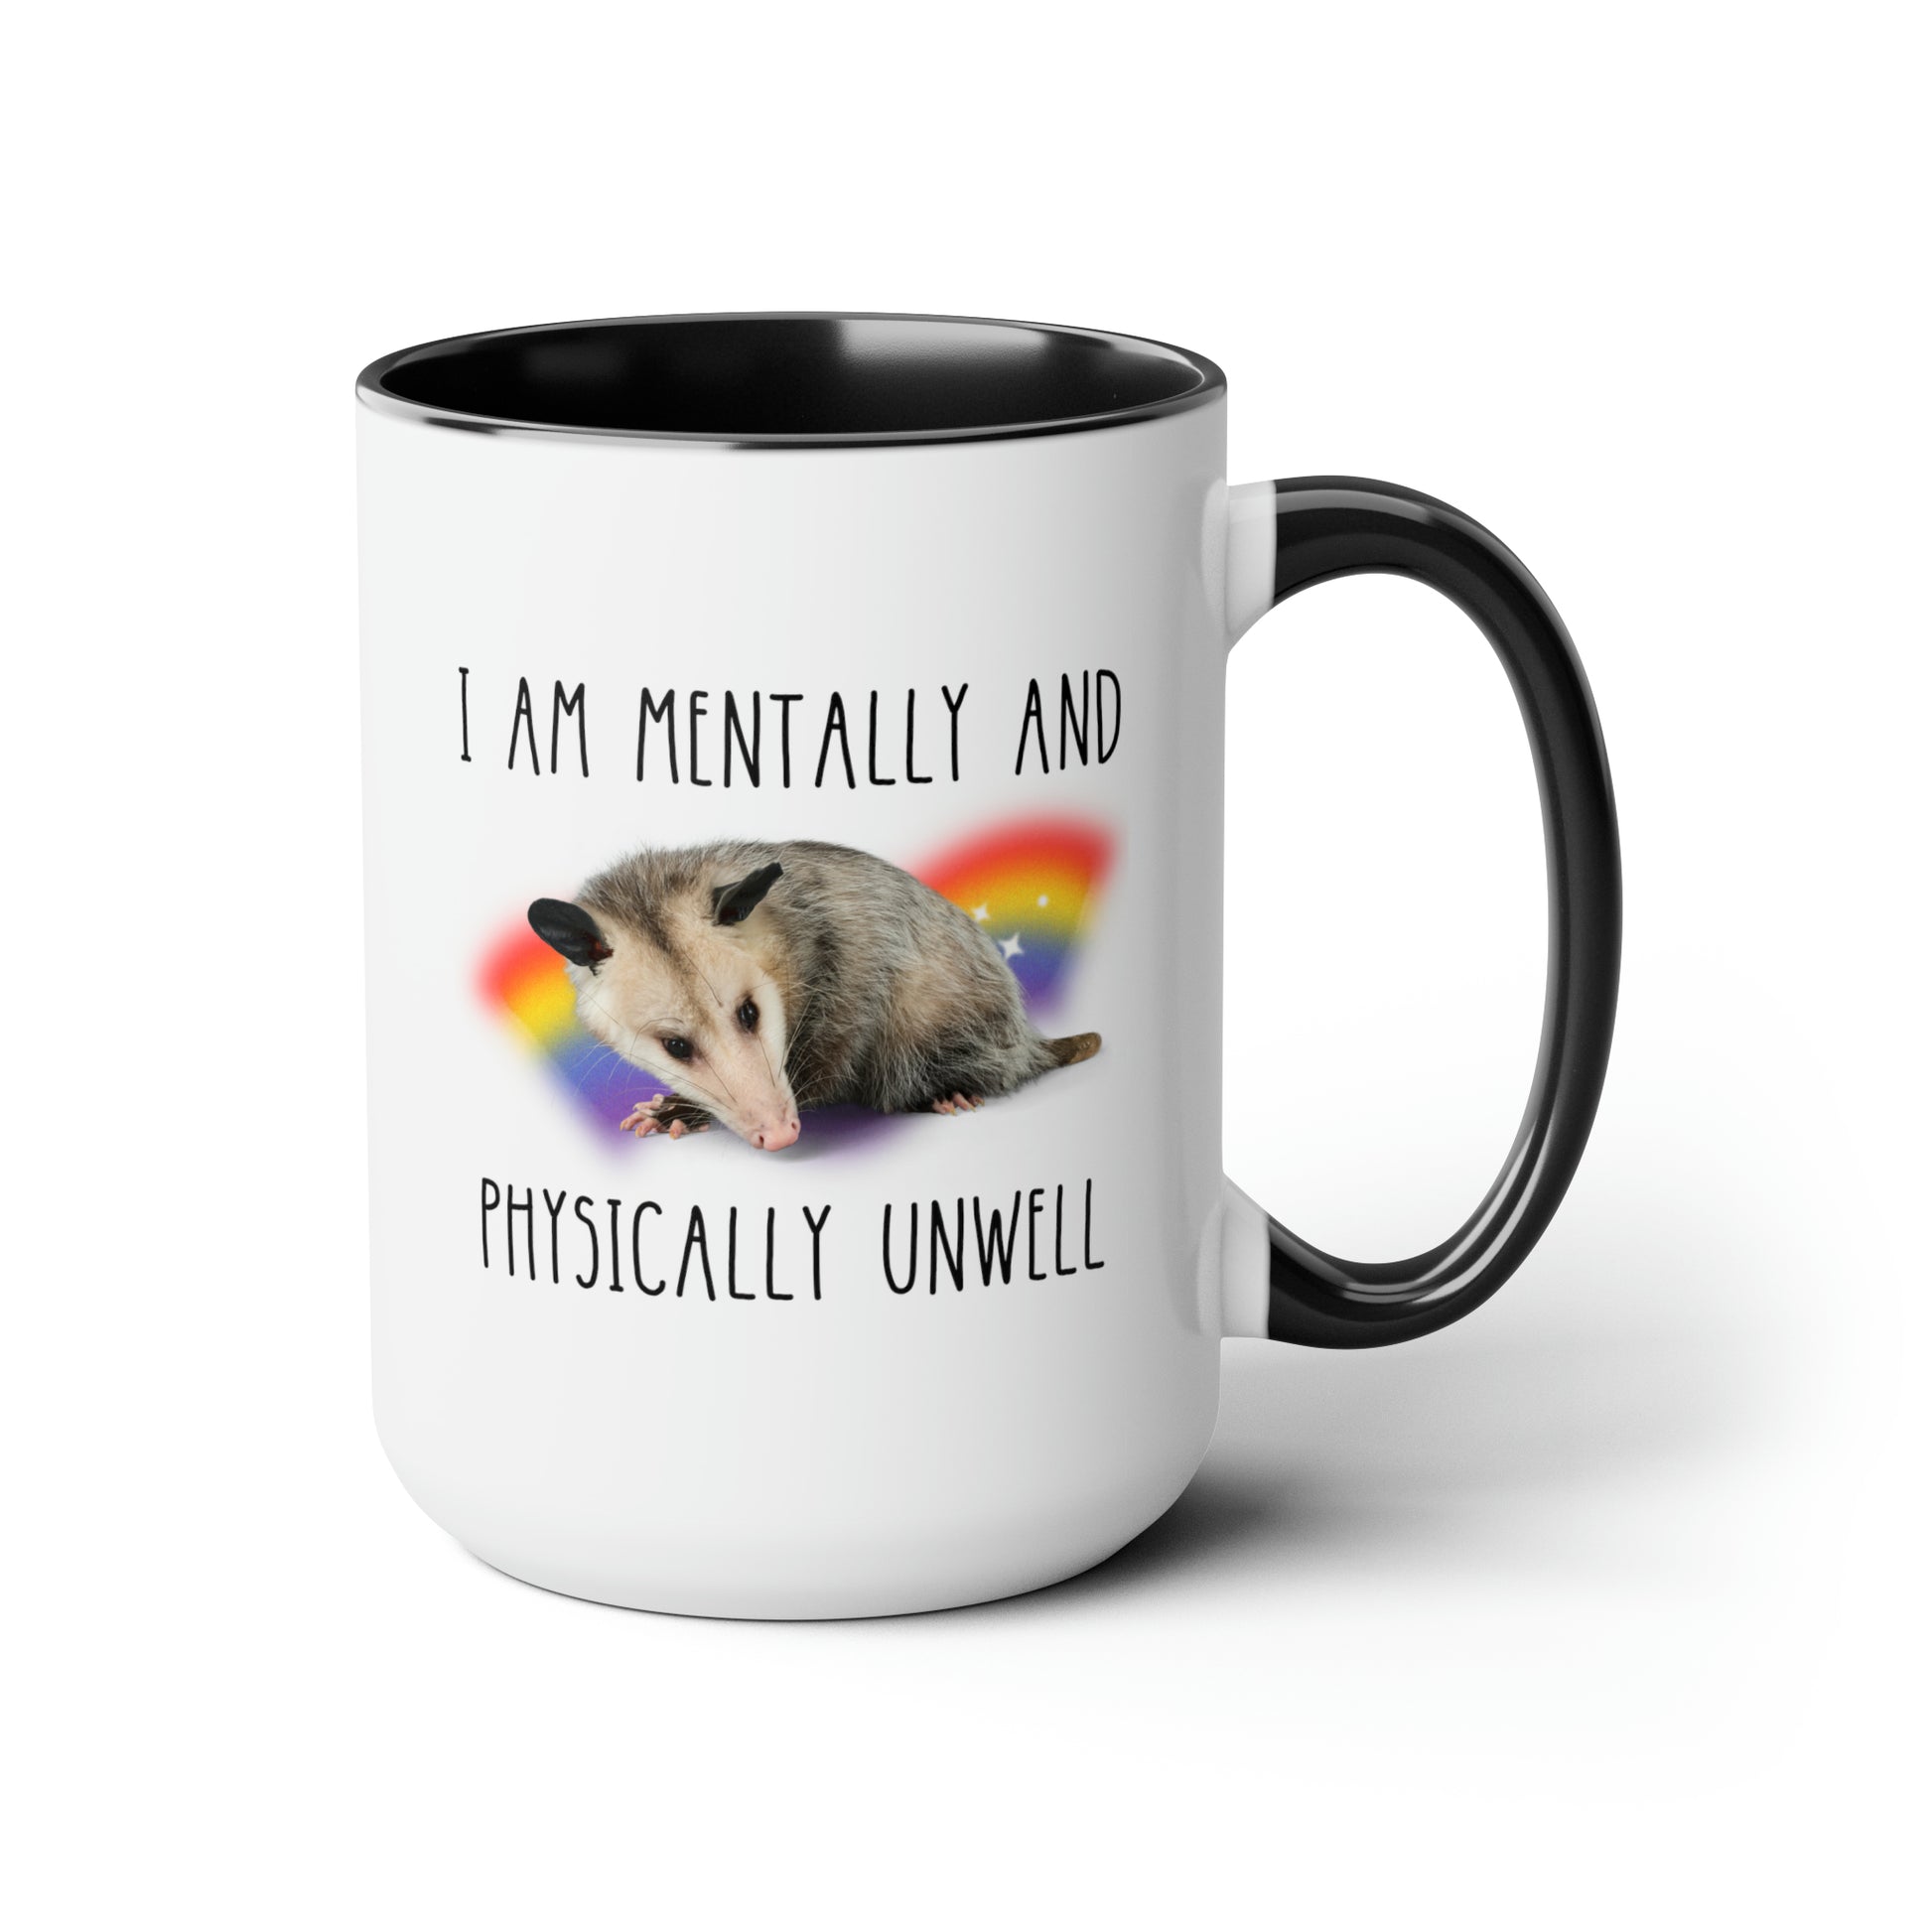 I Am Mentally And Physically Unwell 15oz white with black accent funny large coffee mug gift for mental health meme retro rainbow sparkles possum lover opossum waveywares wavey wares wavywares wavy wares